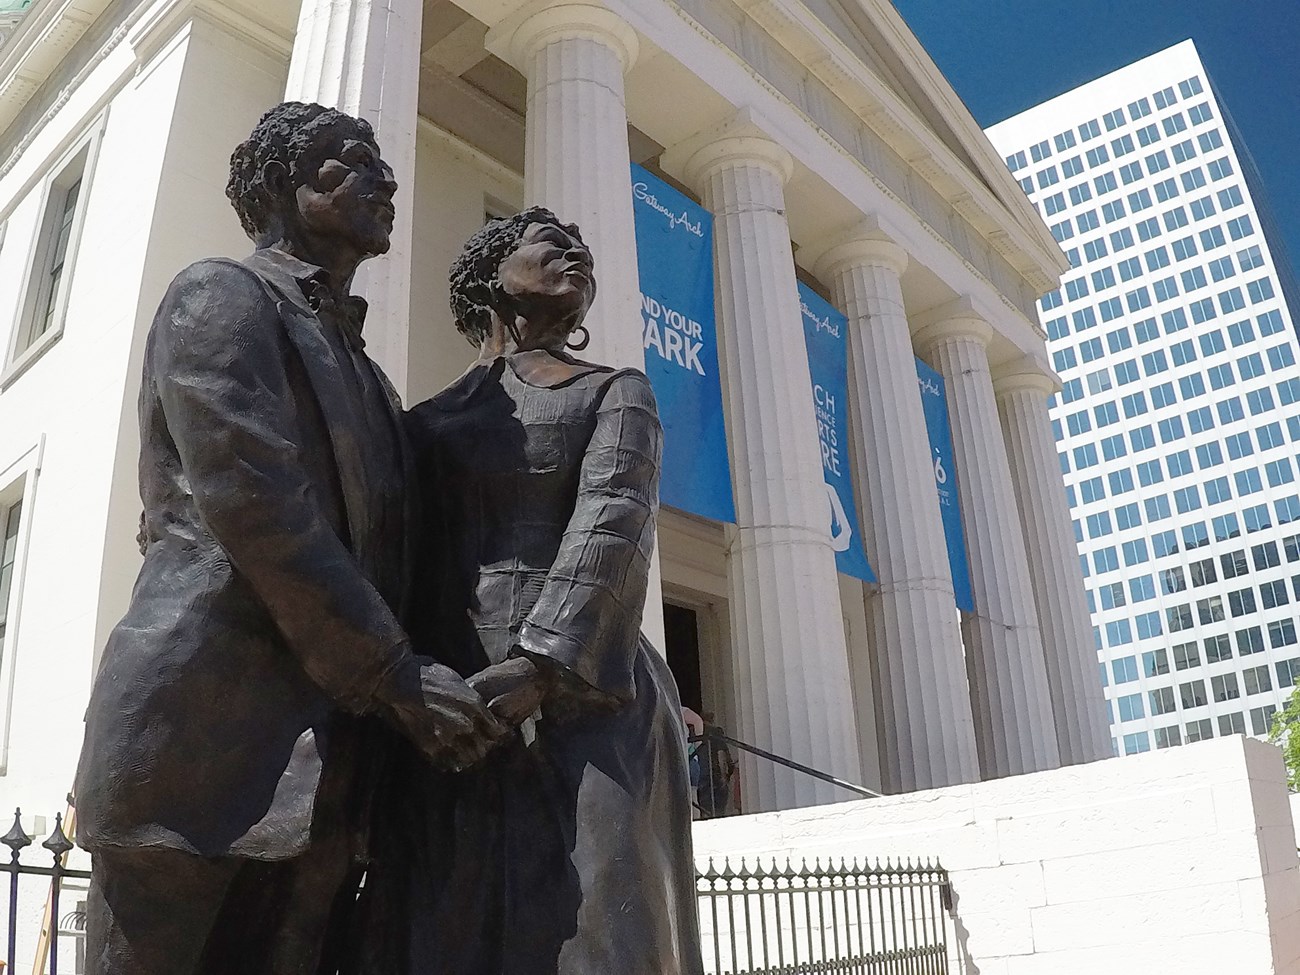 Dred and Harriet Scott statue and the Old Courthouse.